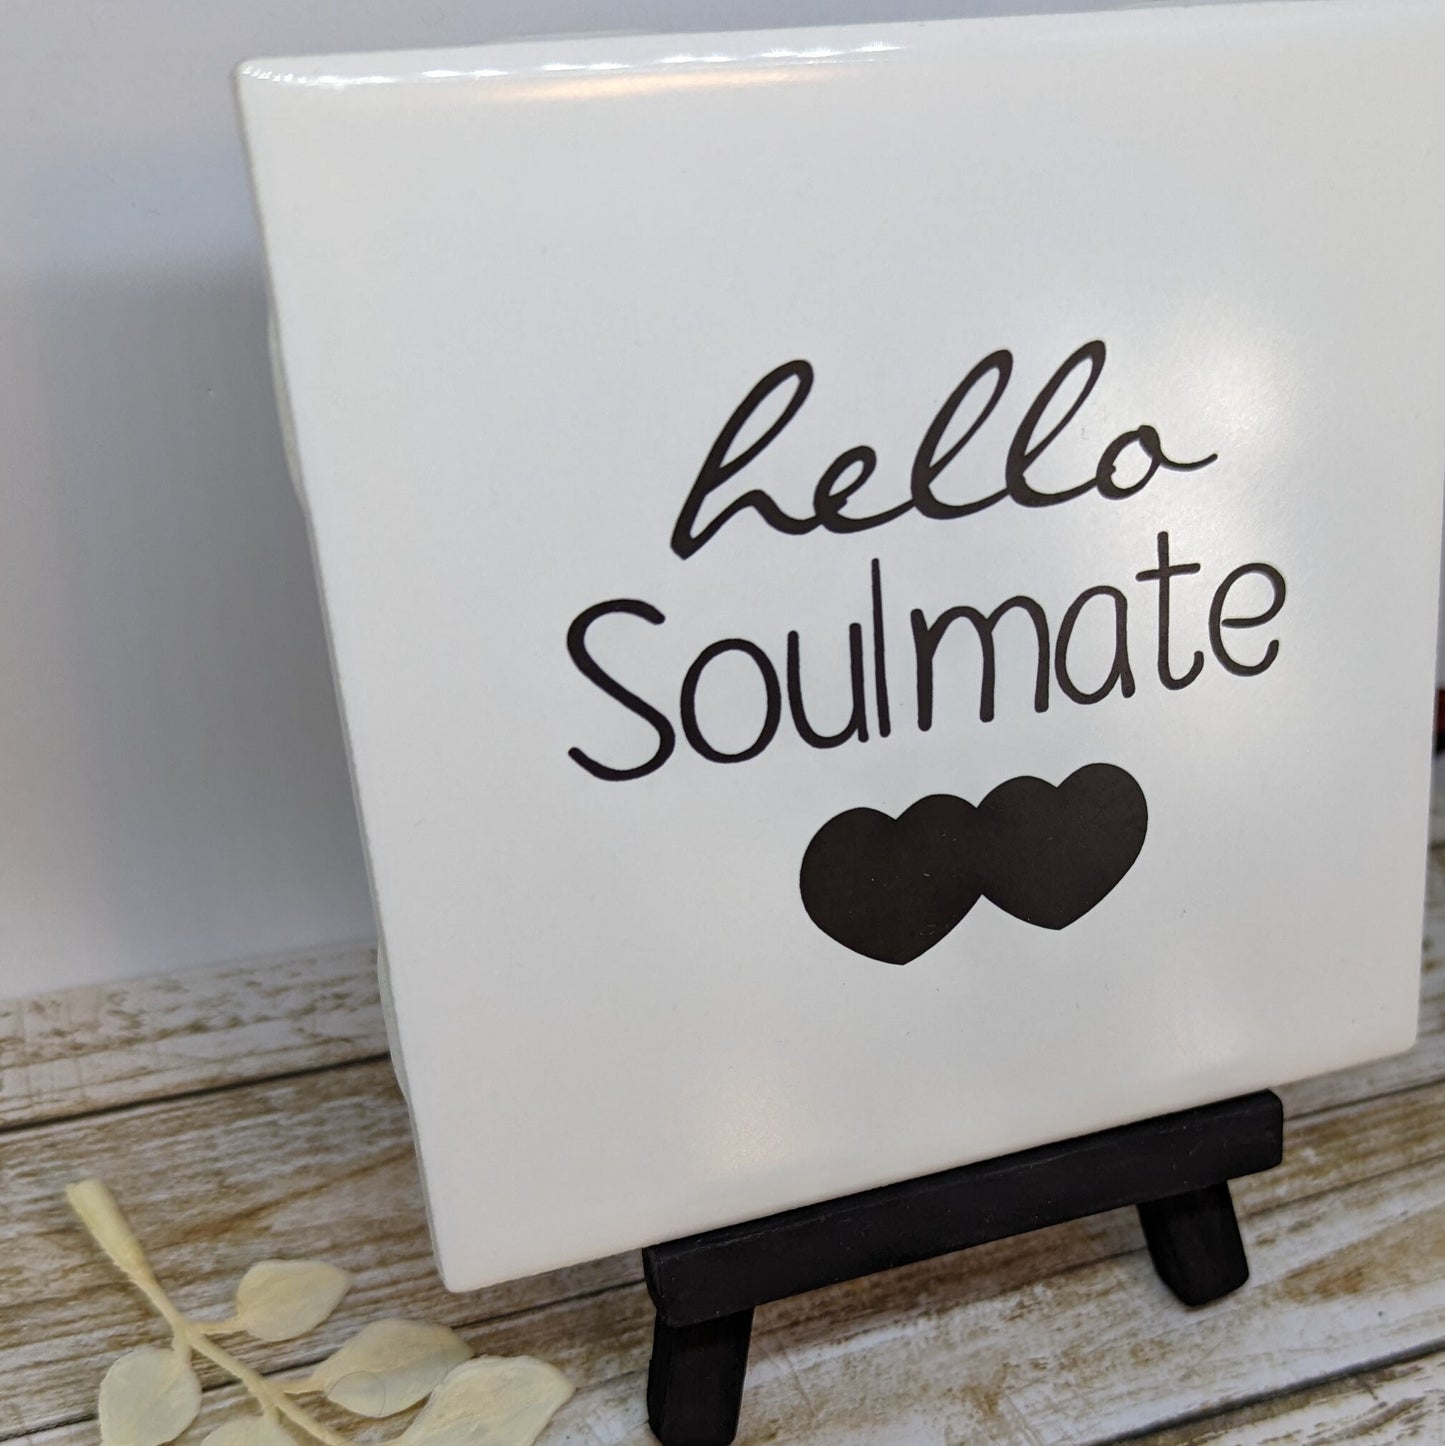 Hello Soulmate Mini Easel Sign - easel included, your color choice